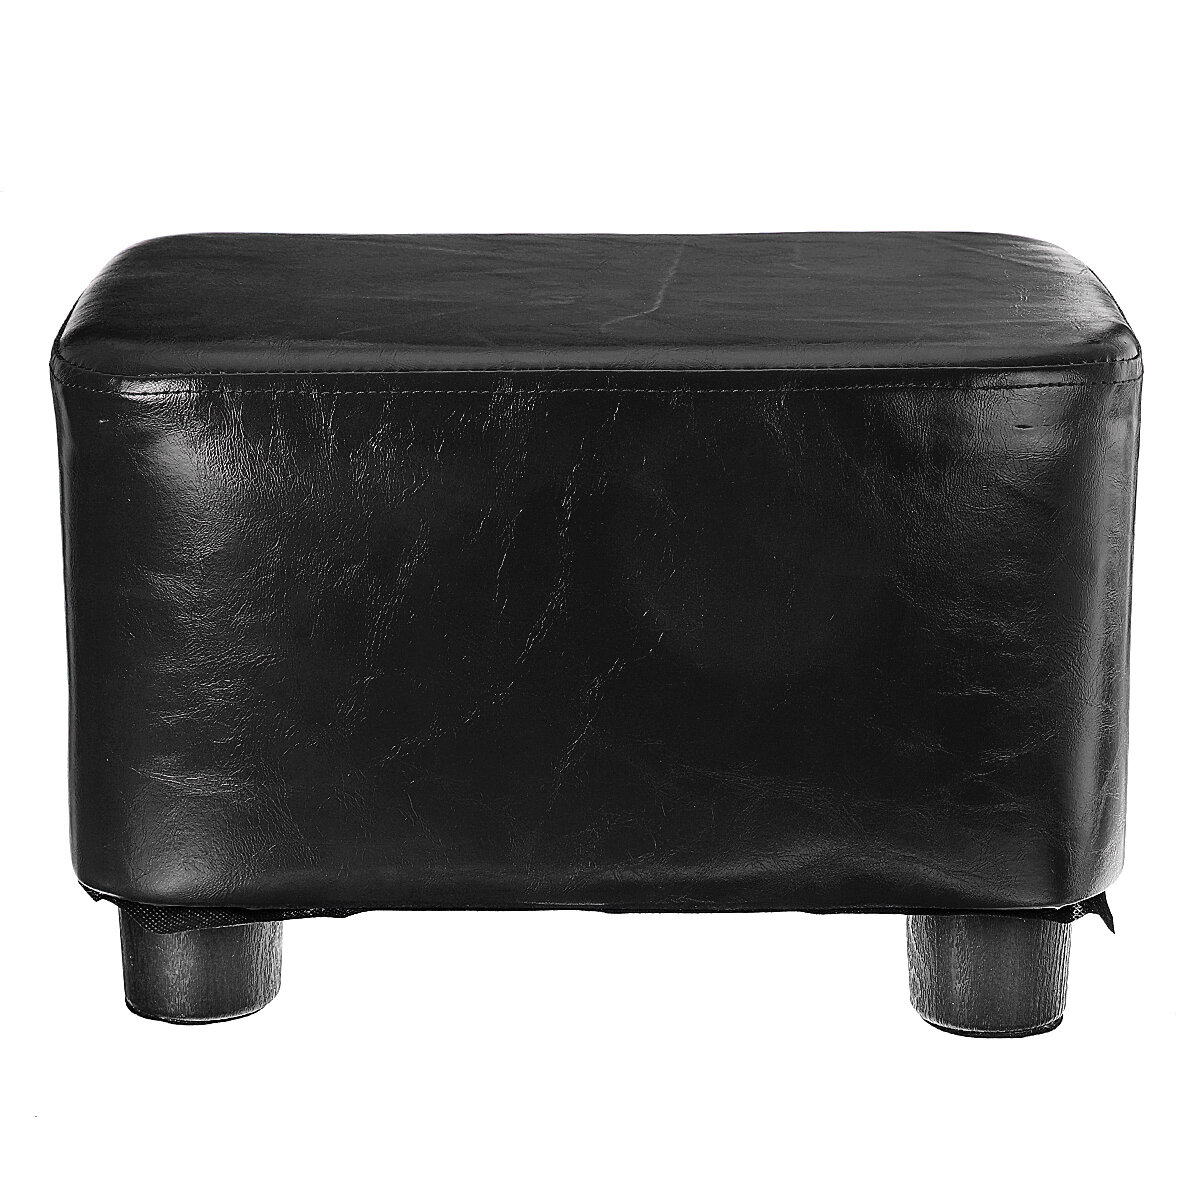 PU Soft Foot Stool Change Shoes Bench Small Ottoman Footrest Footstool Rectangular Seat Stool Home Supplies